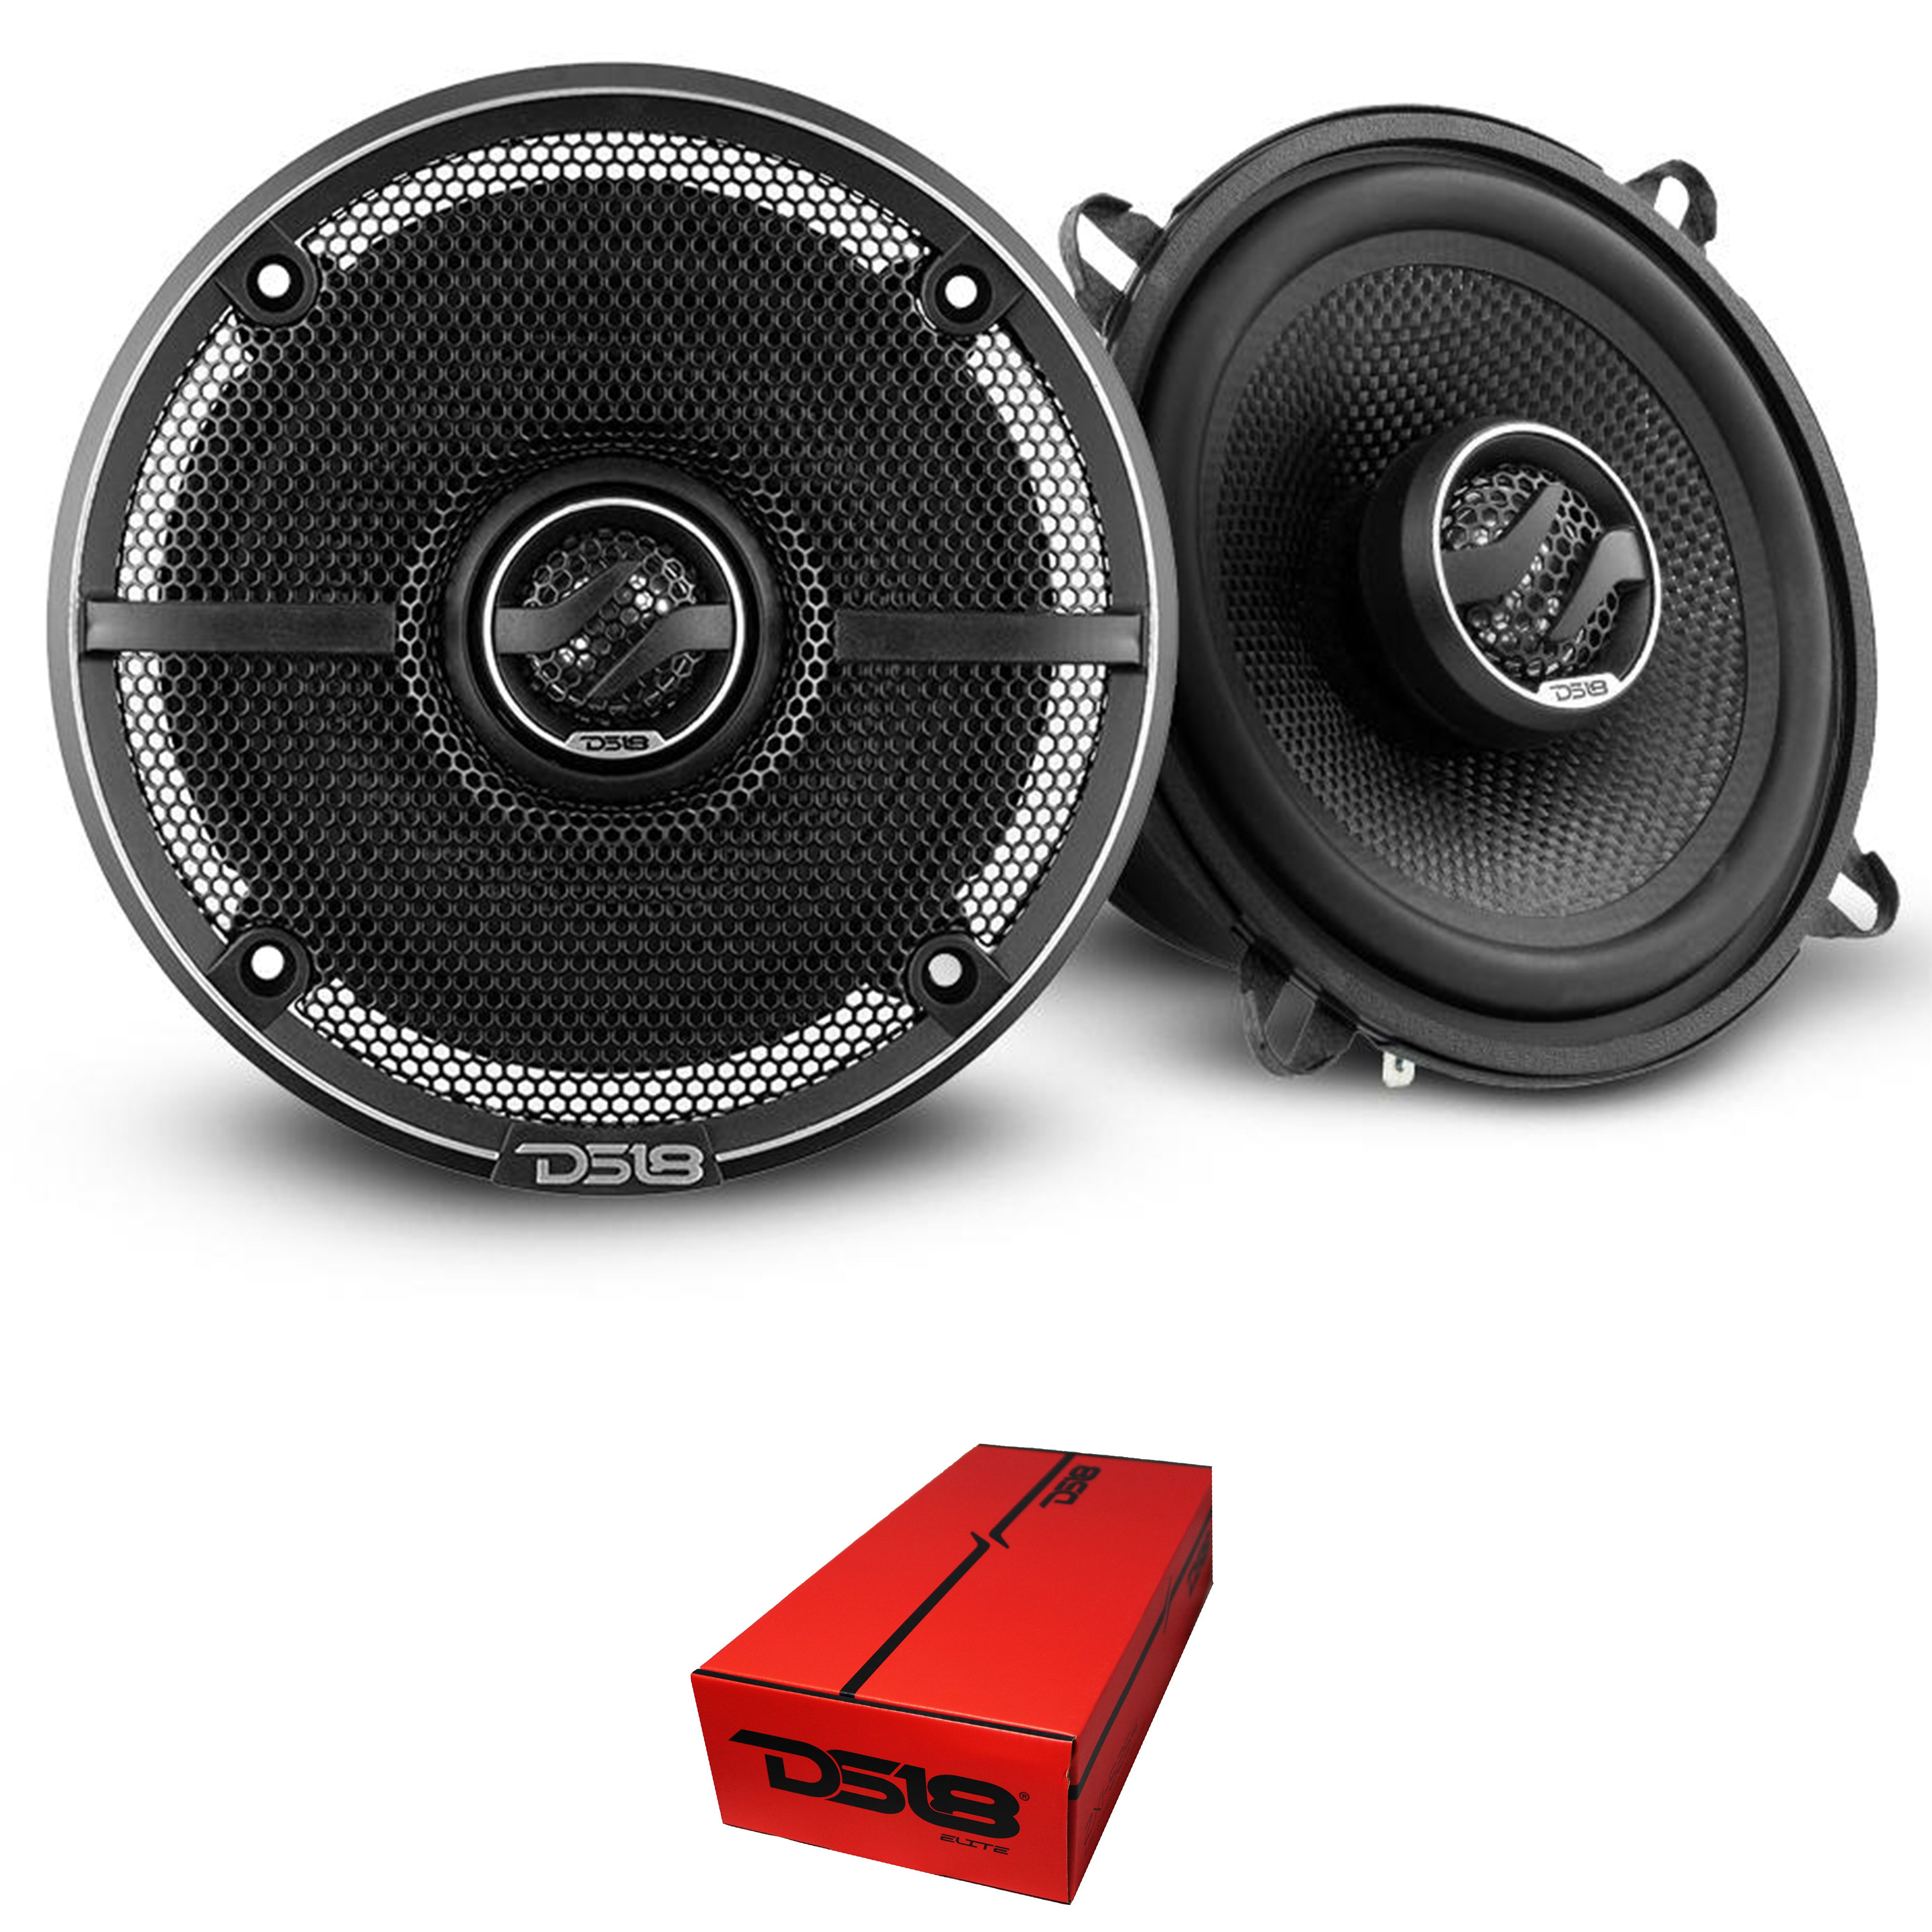 4 Pyle PLMRS53BL 5.25" 180W Low-Profile Marine Speakers with LED Lights 